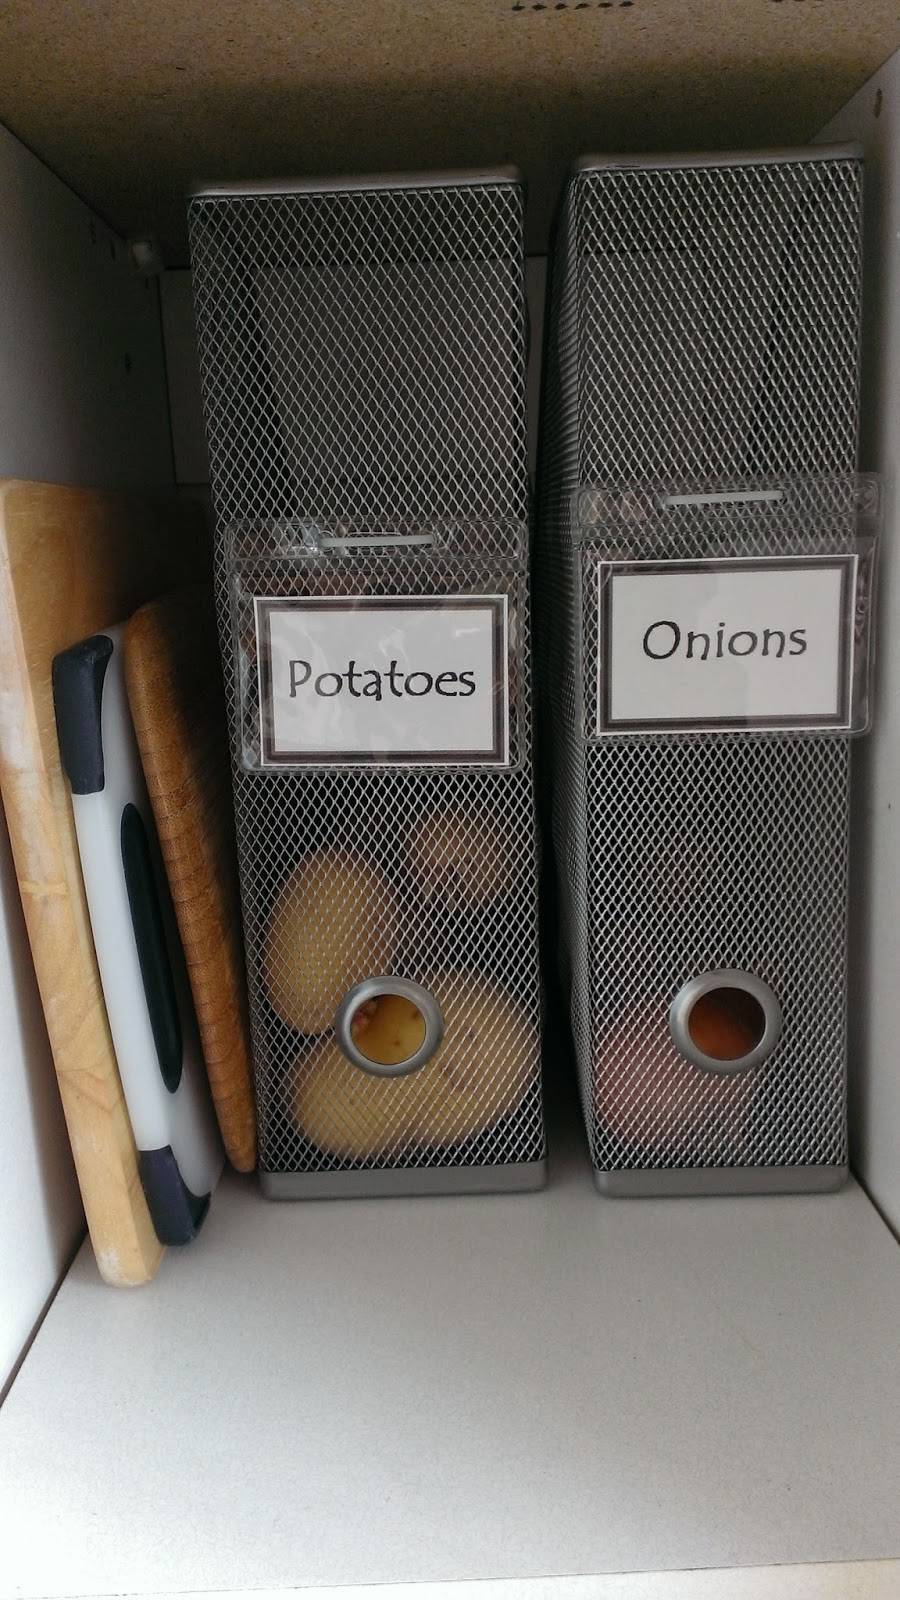 20+ Creative Uses for Magazine Holders to Organize Your Home --> Use mesh magazine holders to corral produce such as potatoes and onions and label them